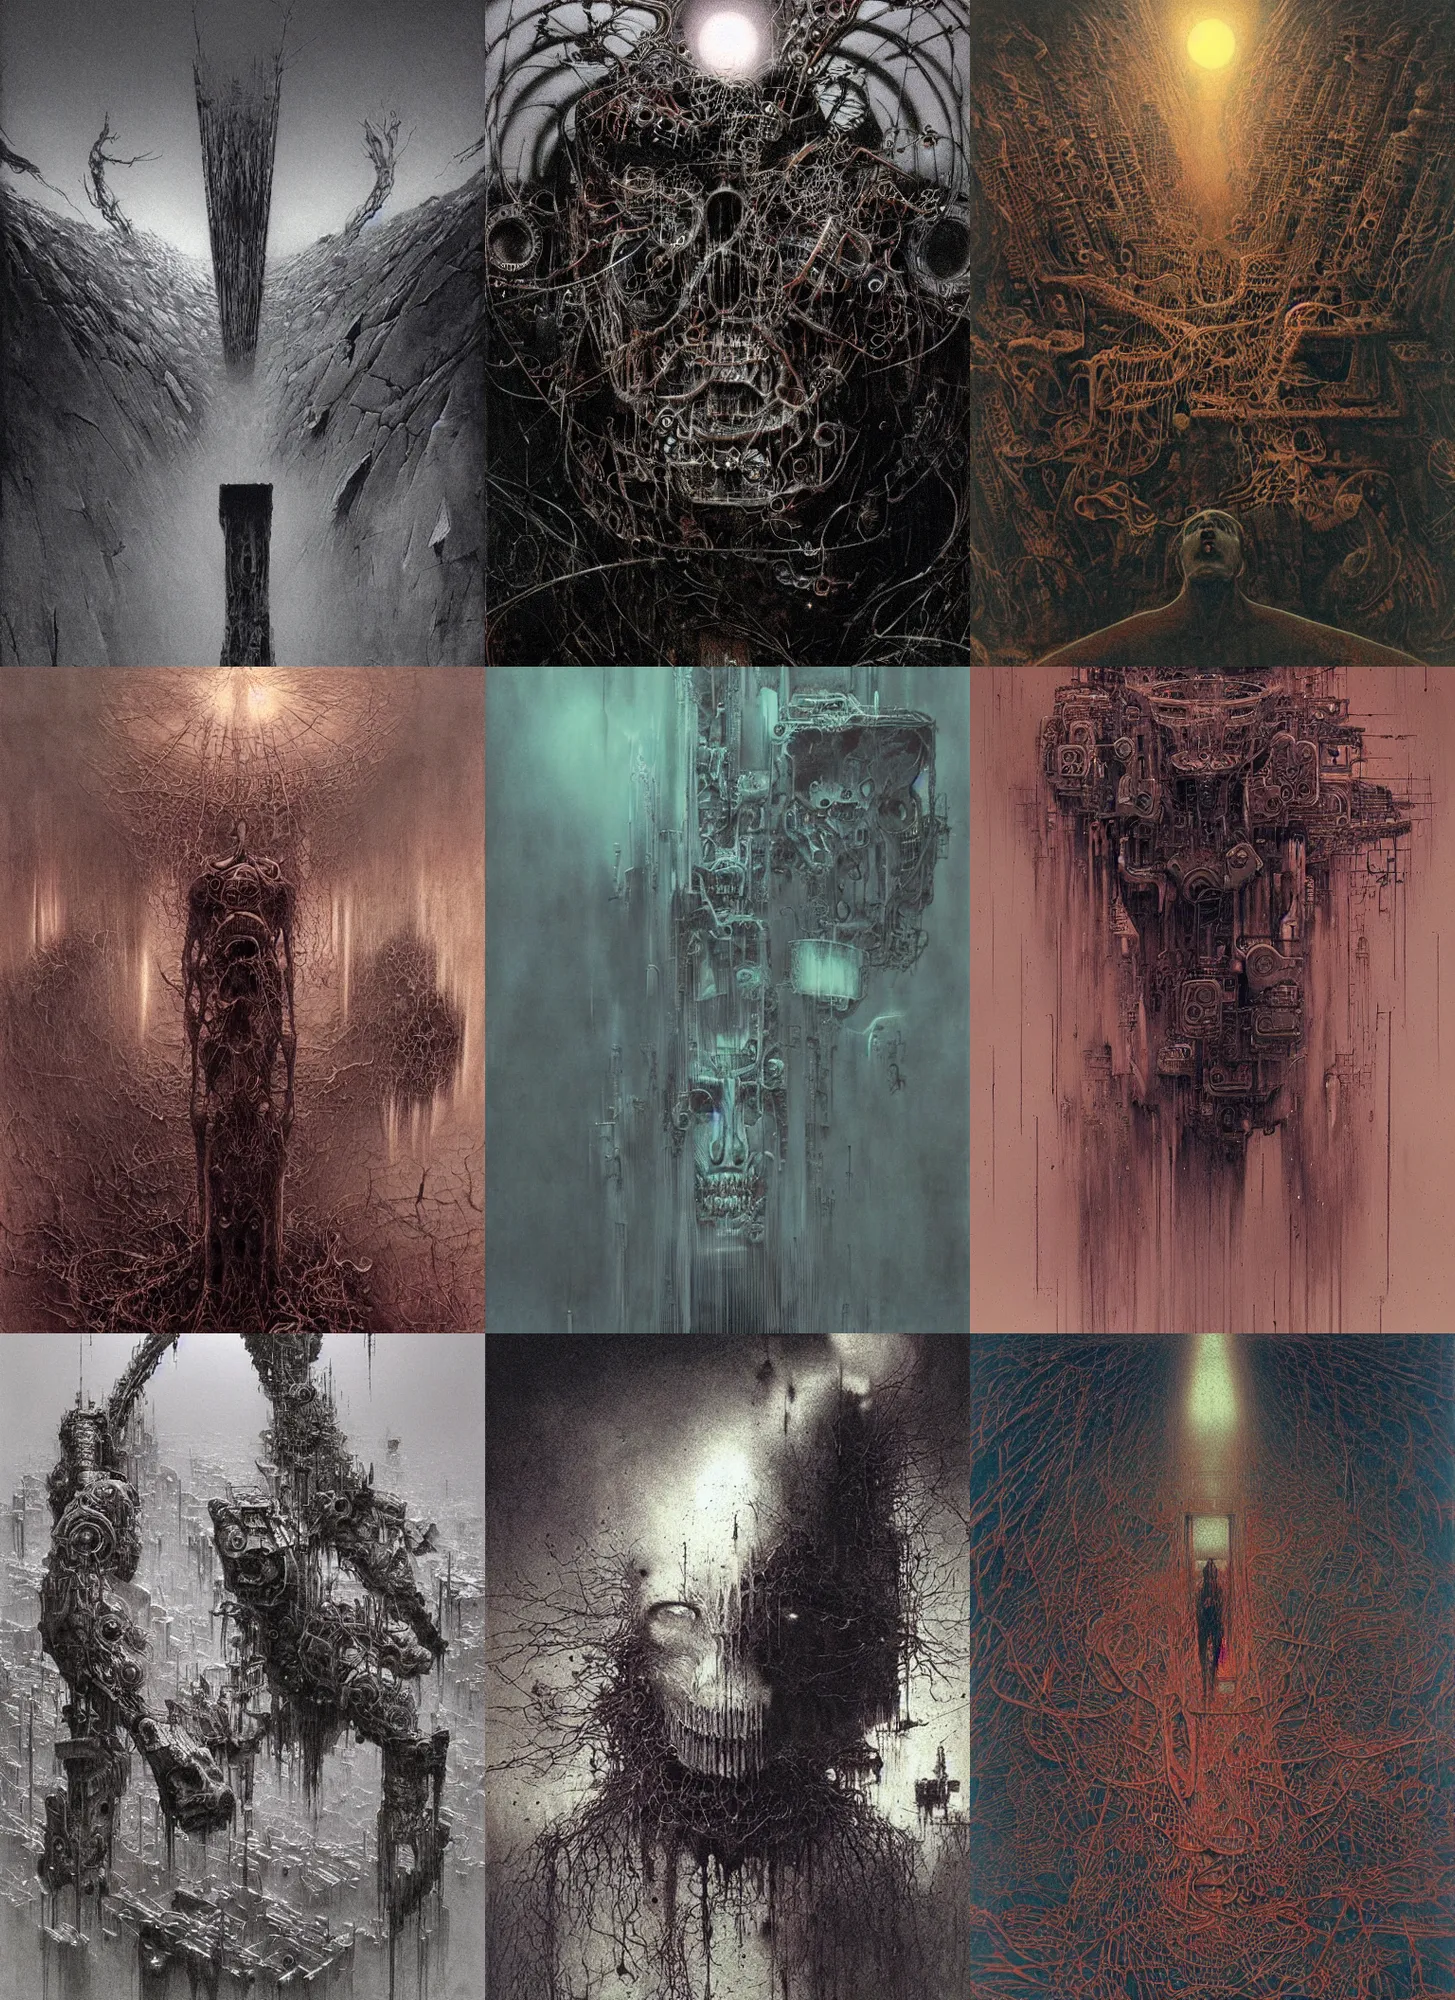 Prompt: machinic desire, Nick Land\'s abstract philosophical concept illustrated by James Gurney and Zdislaw Beksinski in omnious, menacing, dark, hyperdetailed aesthetic